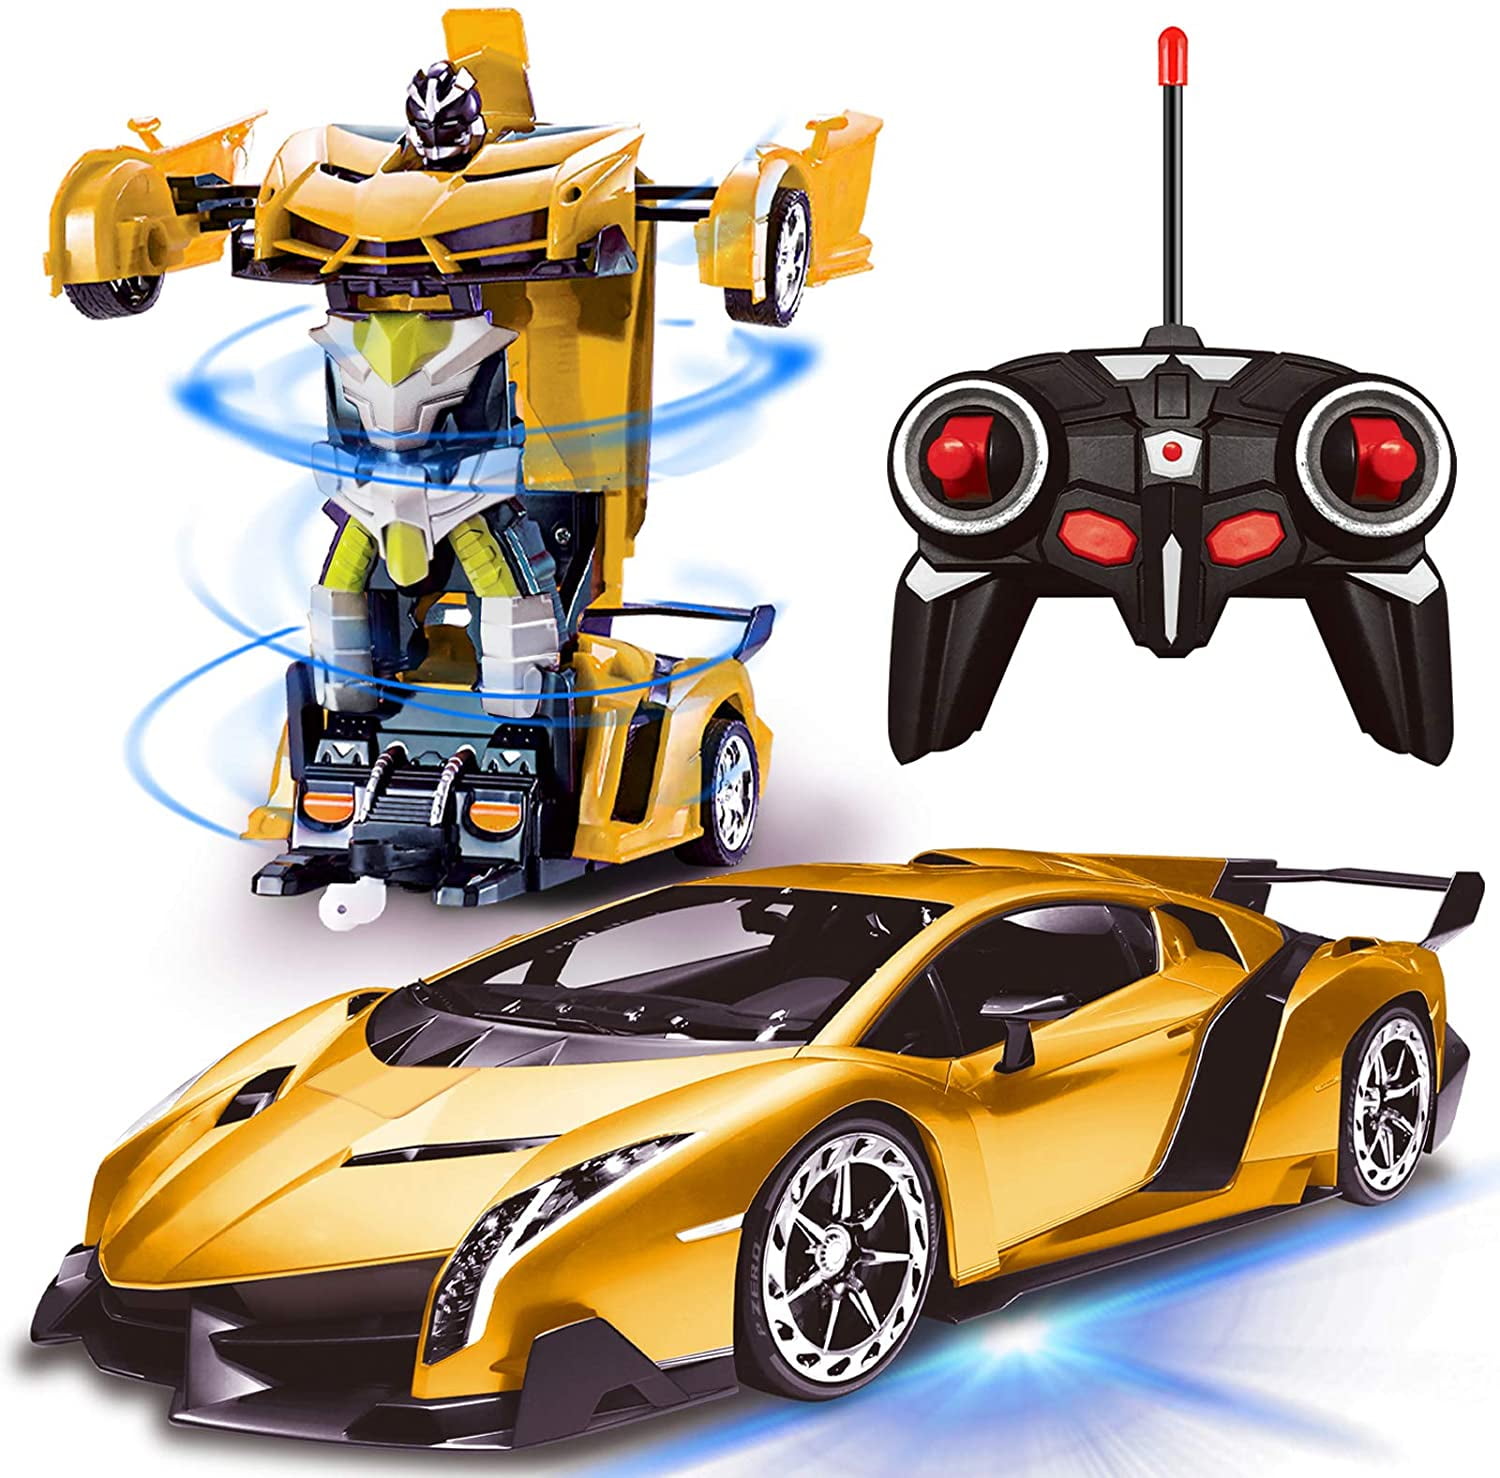 Toys for Boys Transformer RC Robot Car Remote Control 2 IN 1 Baby Kids Xmas Gift 